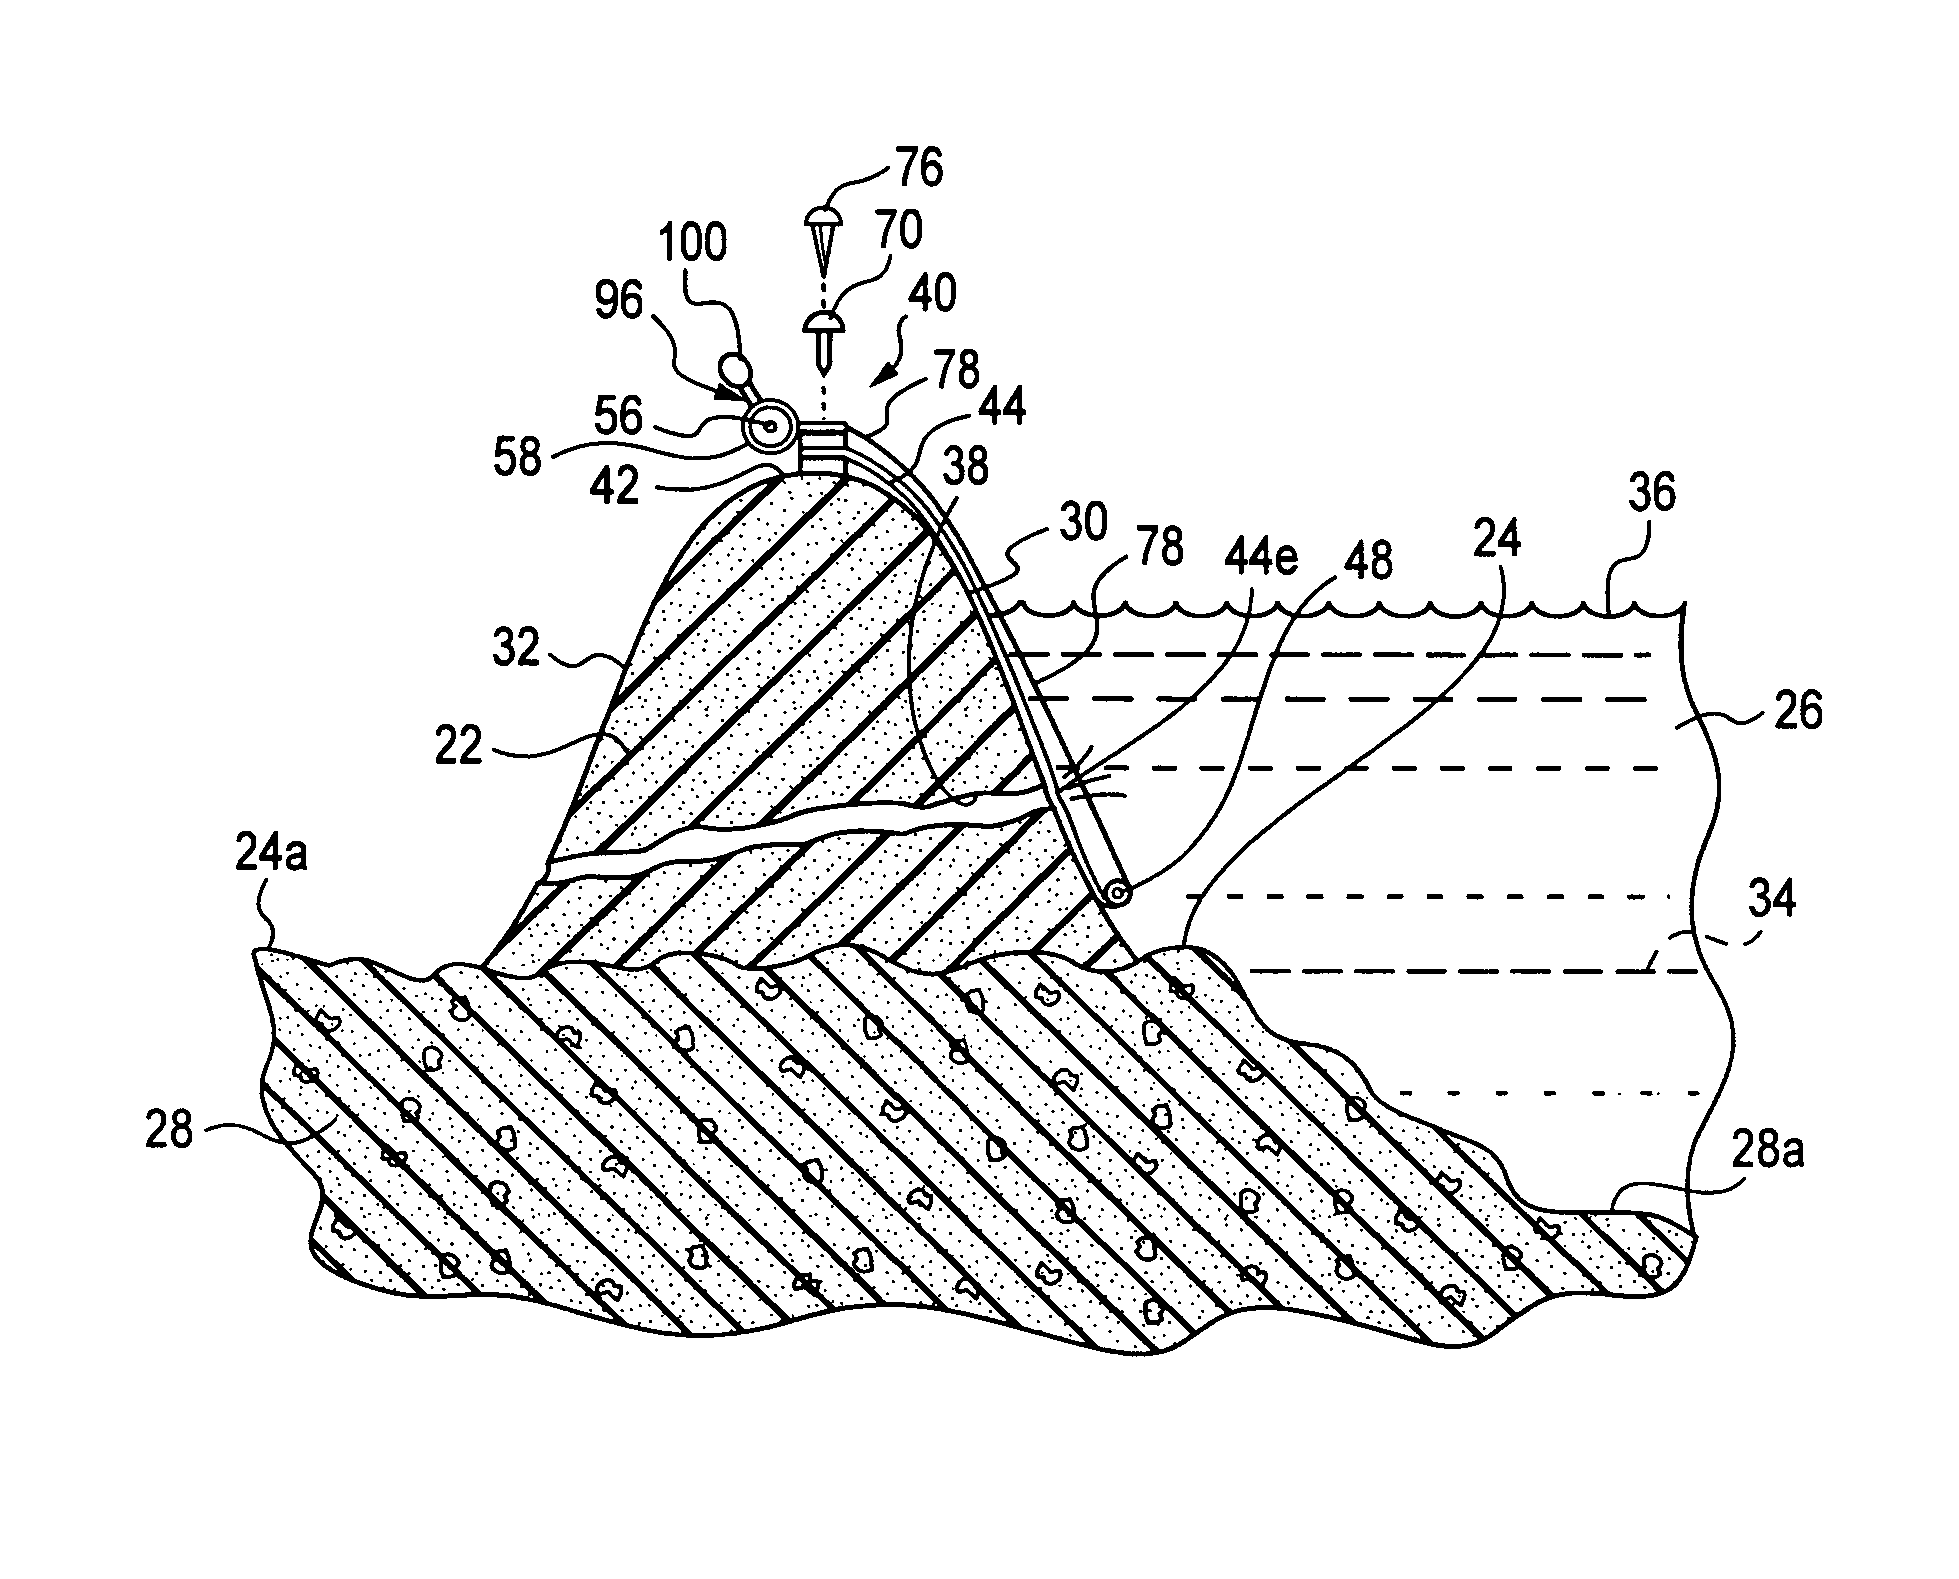 Apparatus for and methods of stabilizing a leaking dam or levee